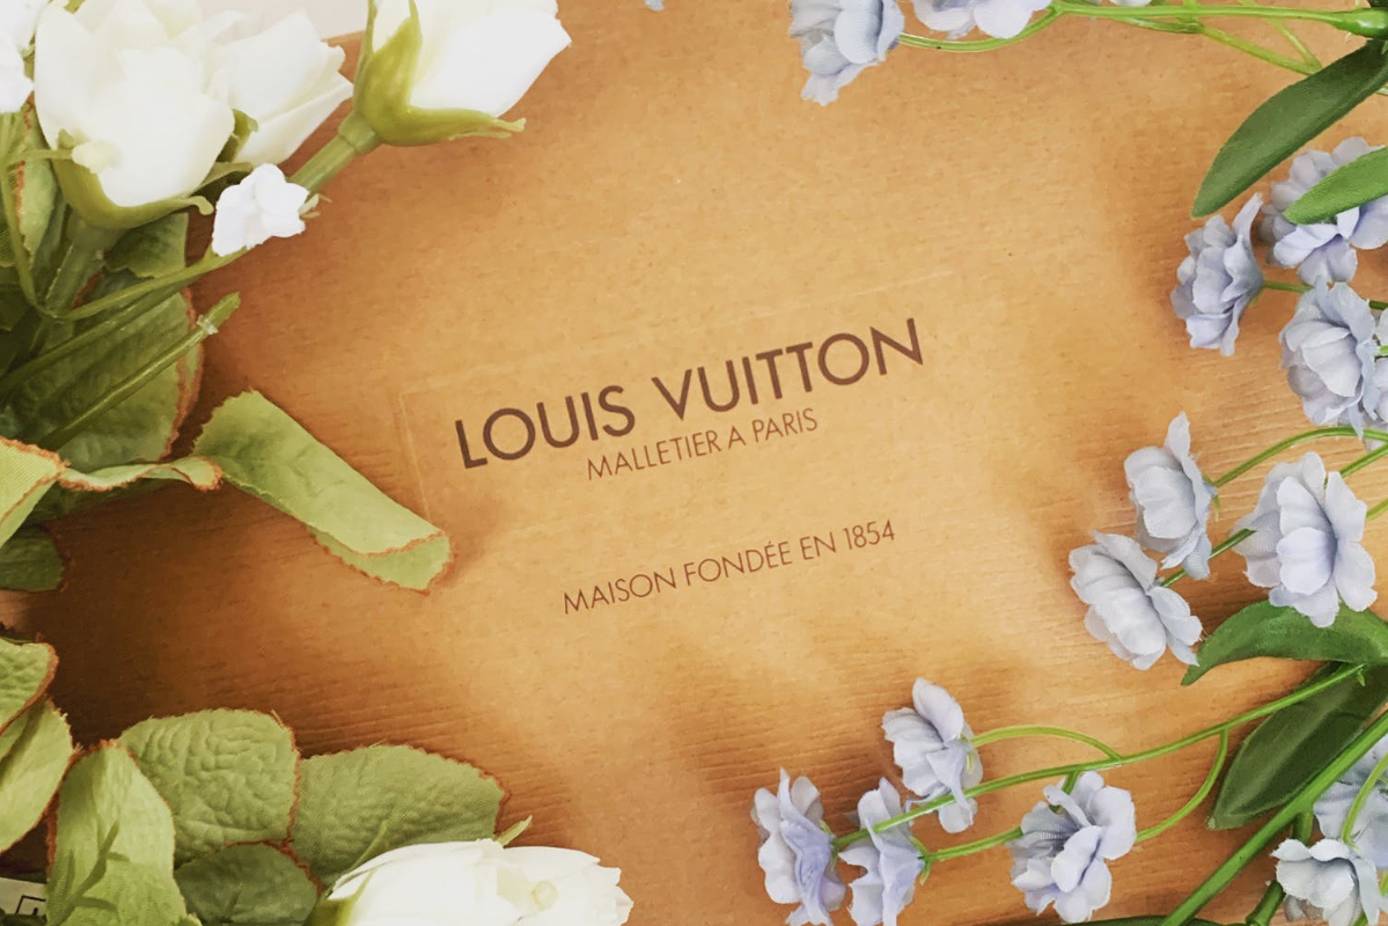 Louis Vuitton ranks as most valuable luxury company in Interbrand's 2021  Top Global Brands